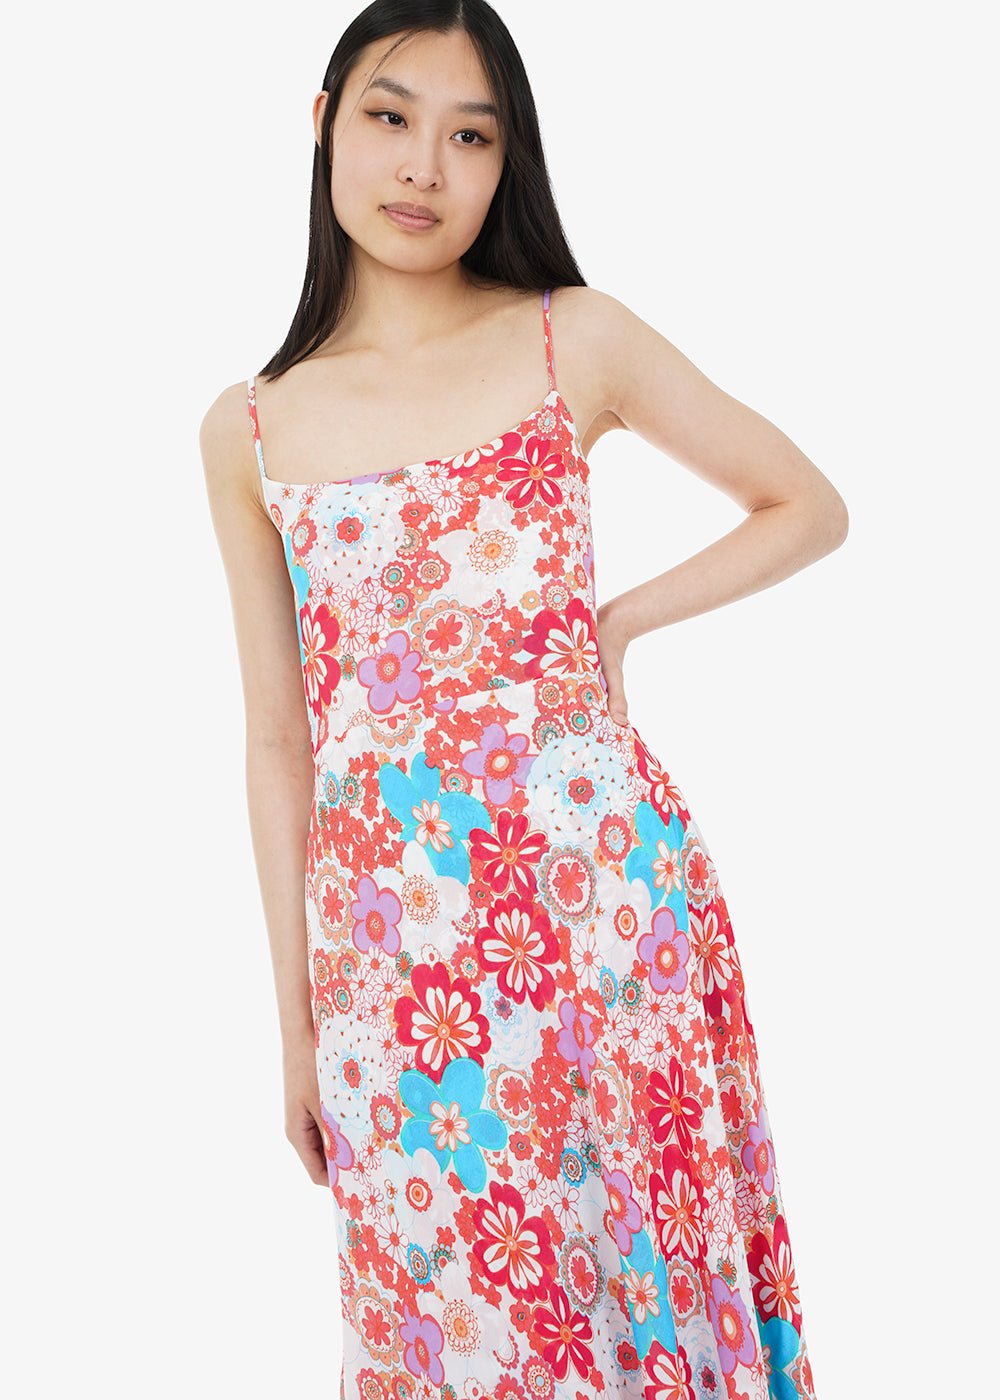 Collina Strada Piccadilly Floral Market Dress - New Classics Studios Sustainable Ethical Fashion Canada